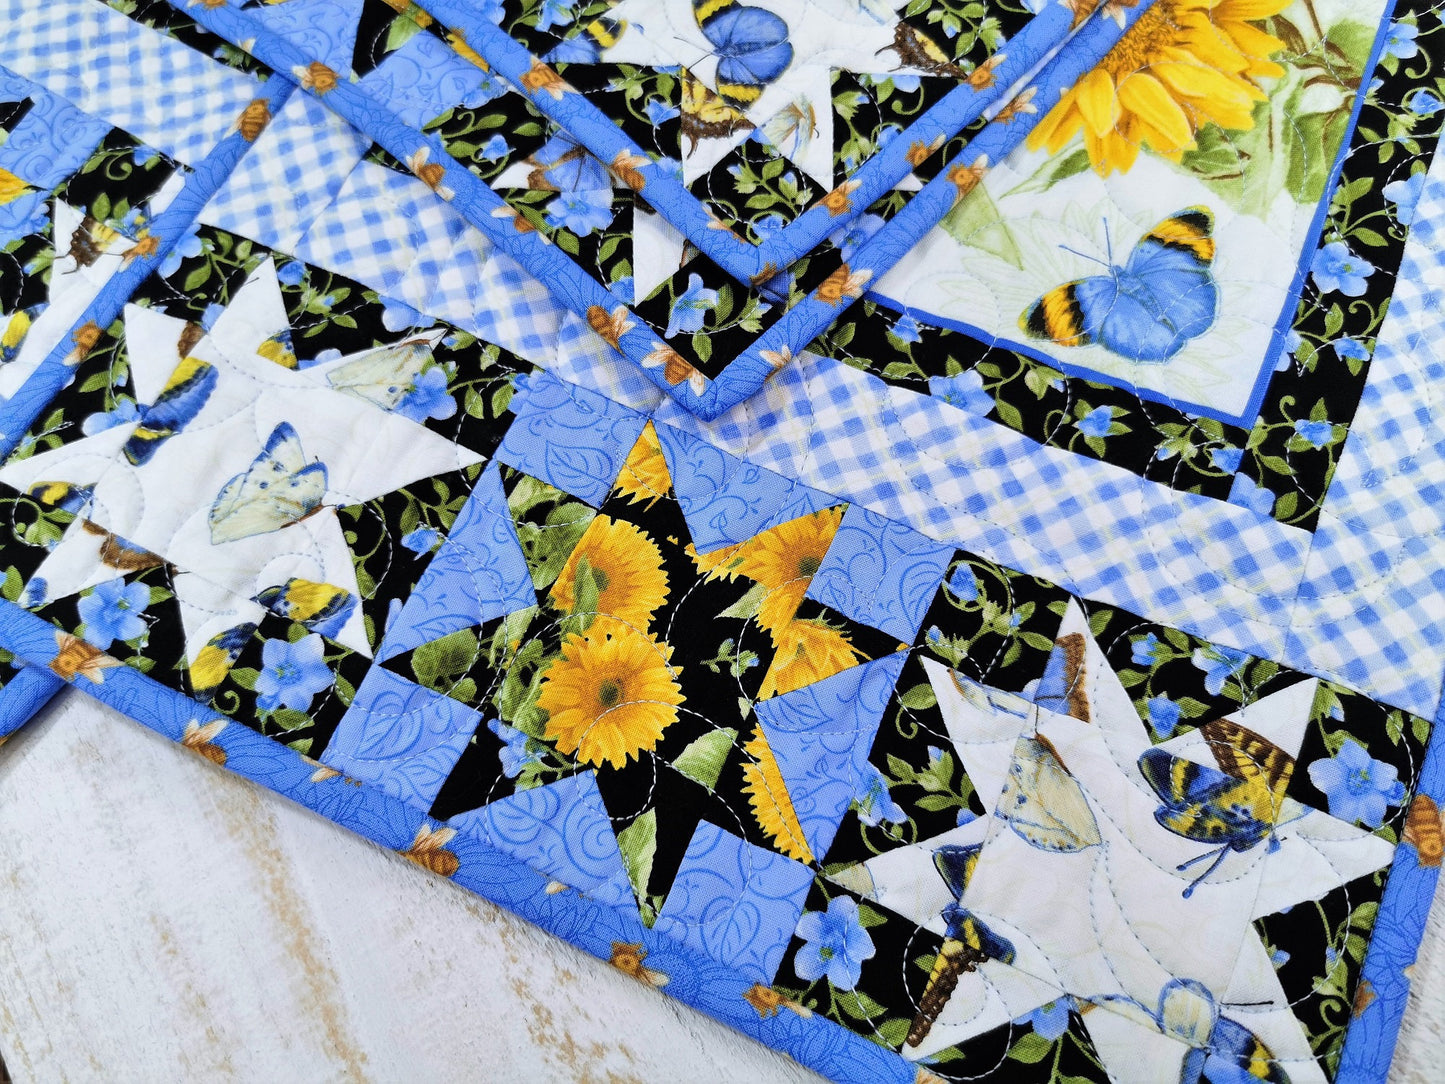 Six Quilted Placemats